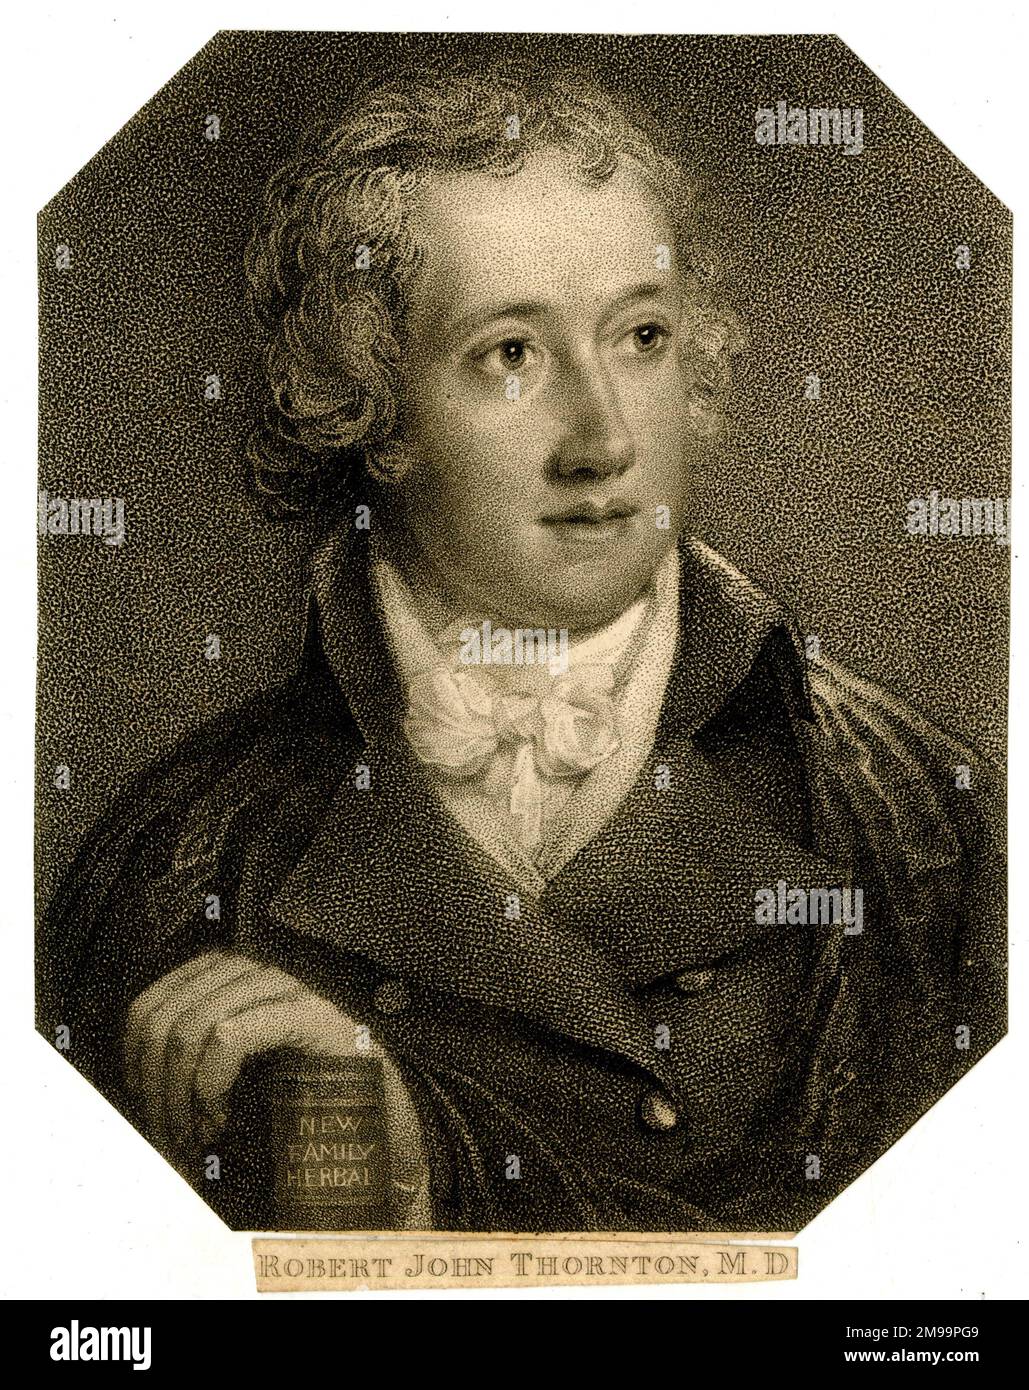 Robert John Thornton (1768-1837), English physician and botanical writer, author of New Family Herbal: Or Popular Account of the Natures and Properties of the Various Plants Used in Medicine, Diet and the Arts, first published in 1810 (as seen in the portrait), as well as other works. Stock Photo